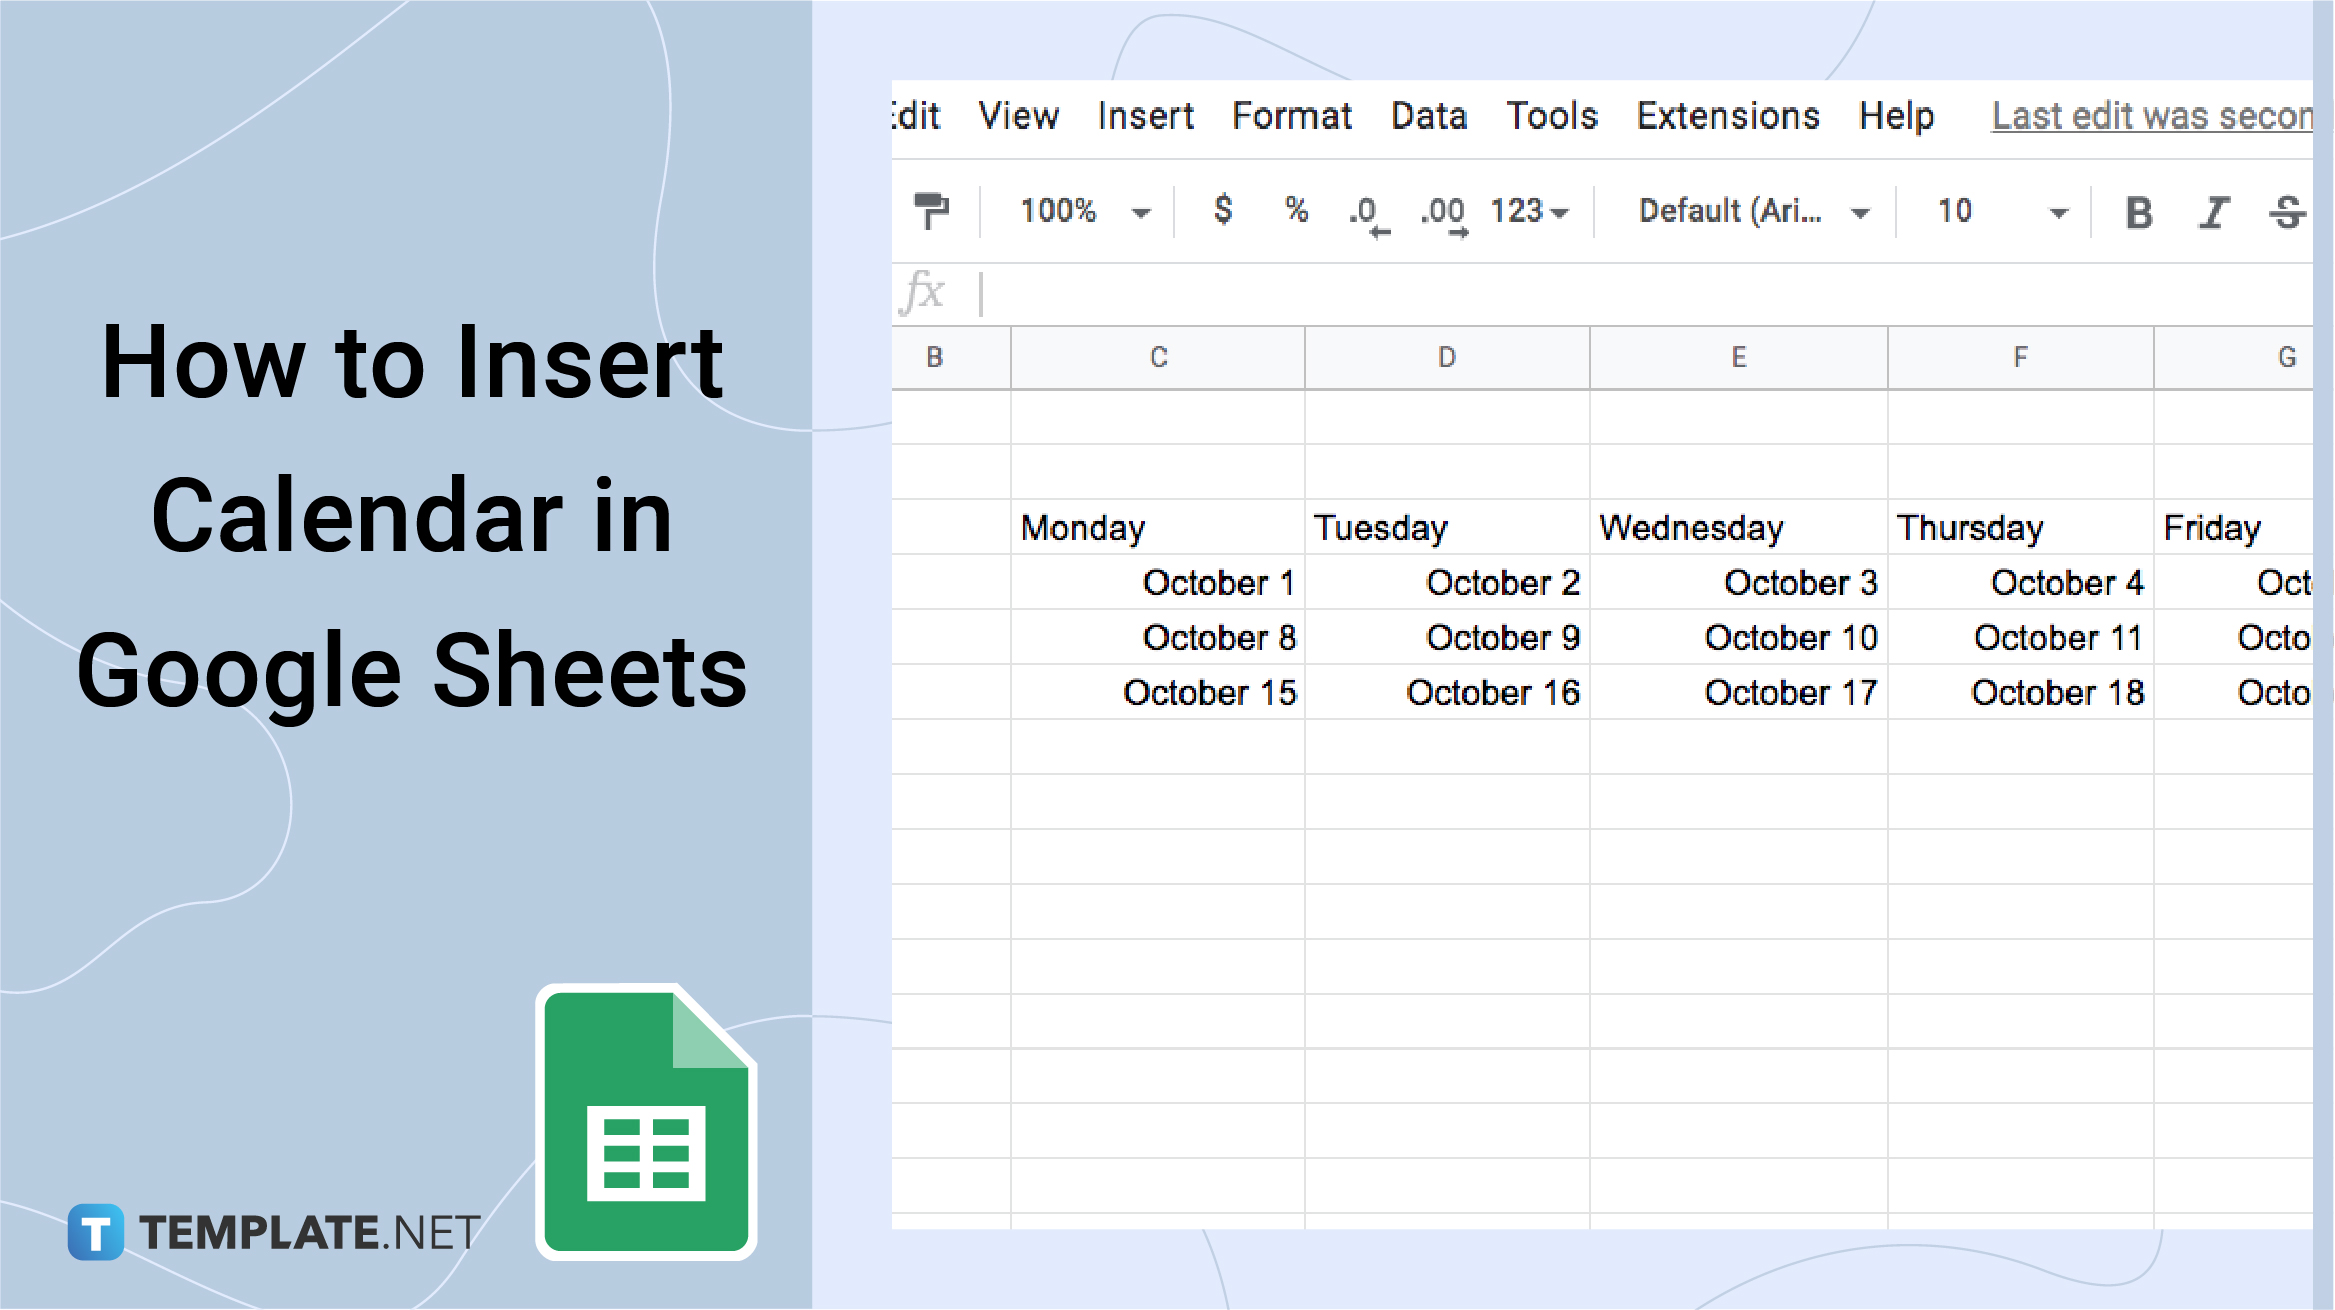 How to Insert Calendar in Google Sheets